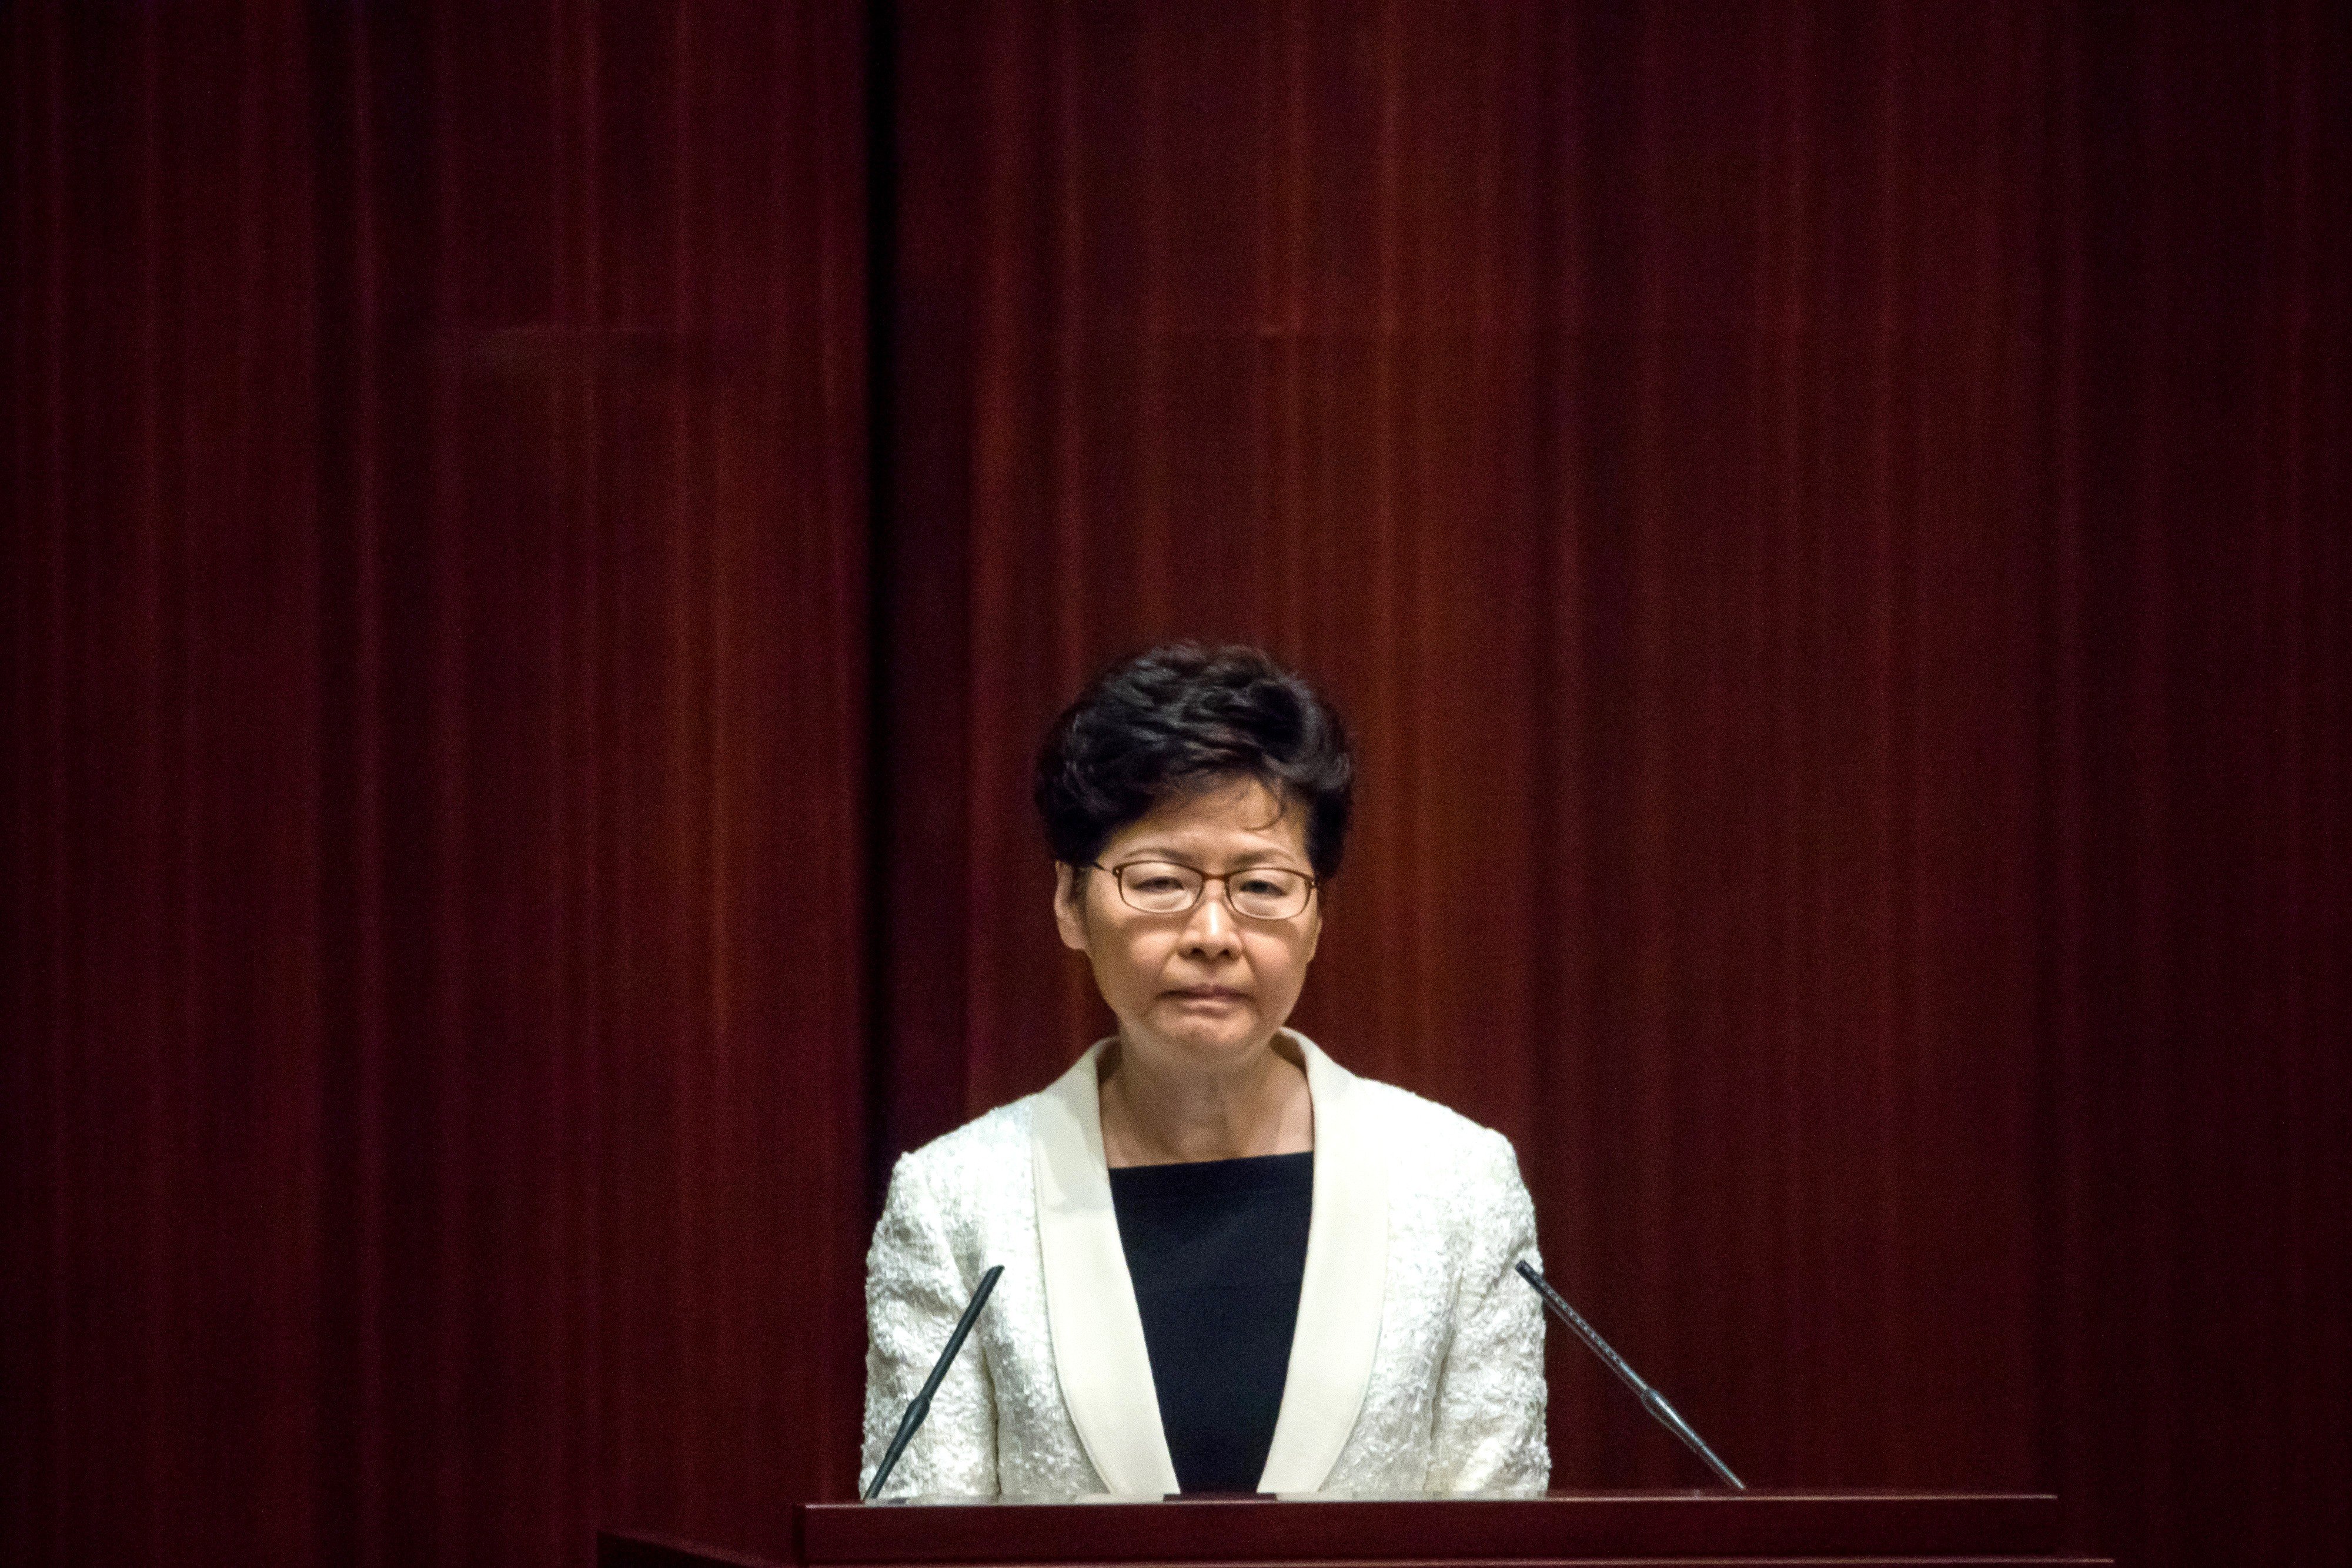 Carrie Lam’s visit to the Legislative Council on October 17 for the chief executive’s question and answer session was cut short after opposition lawmakers shouted her down. Photo: Bloomberg